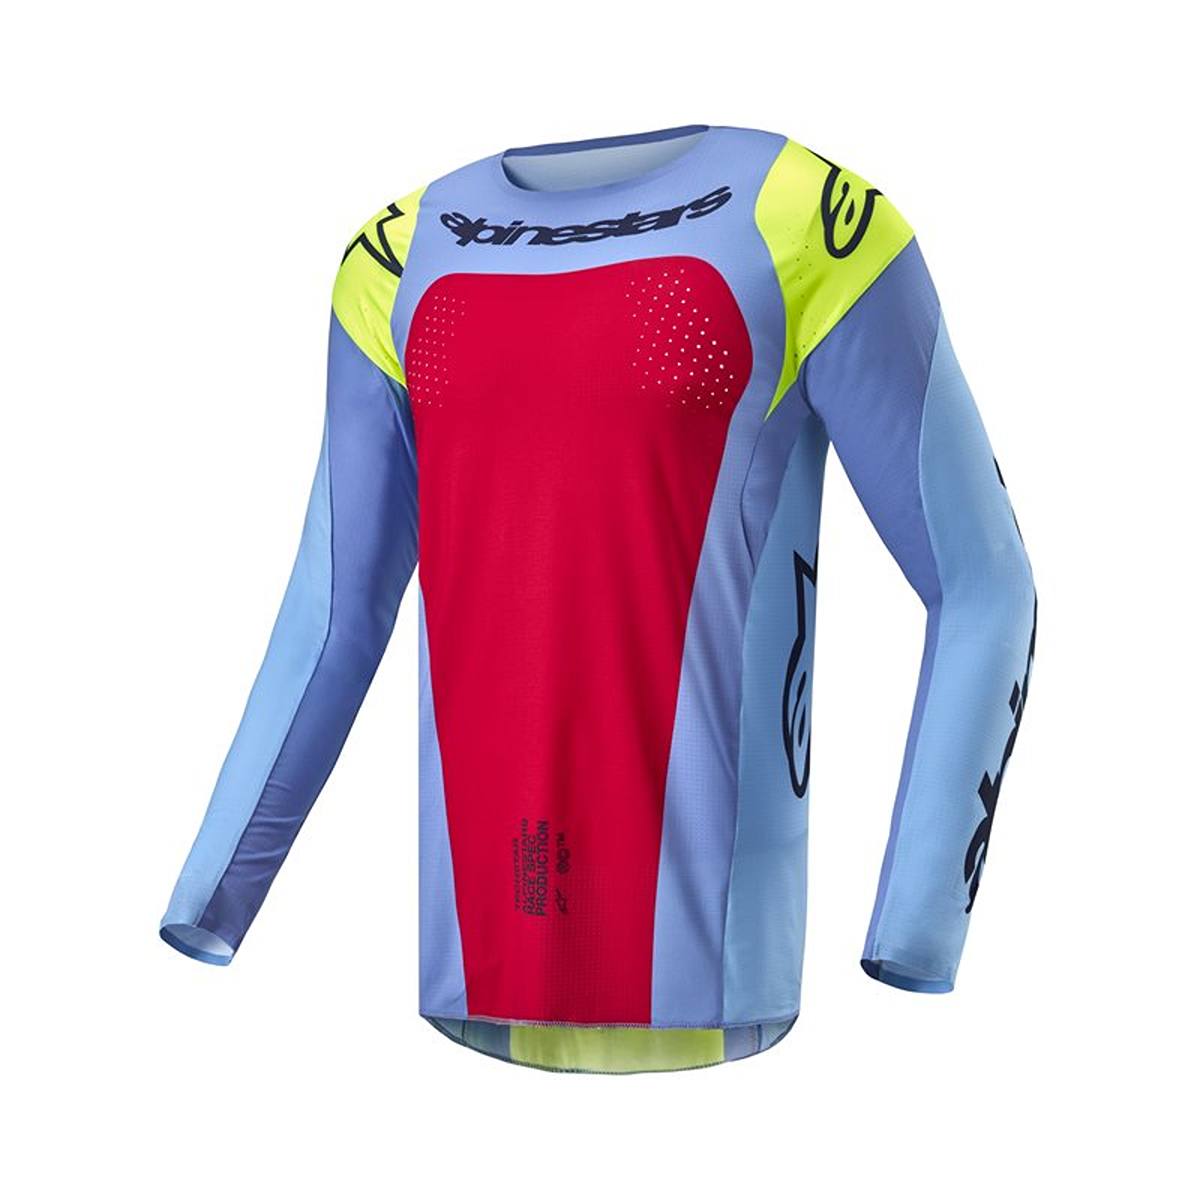 Image of Alpinestars Techstar Ocuri Jersey Light Blue Yellow Fluo Red Berry Taille S